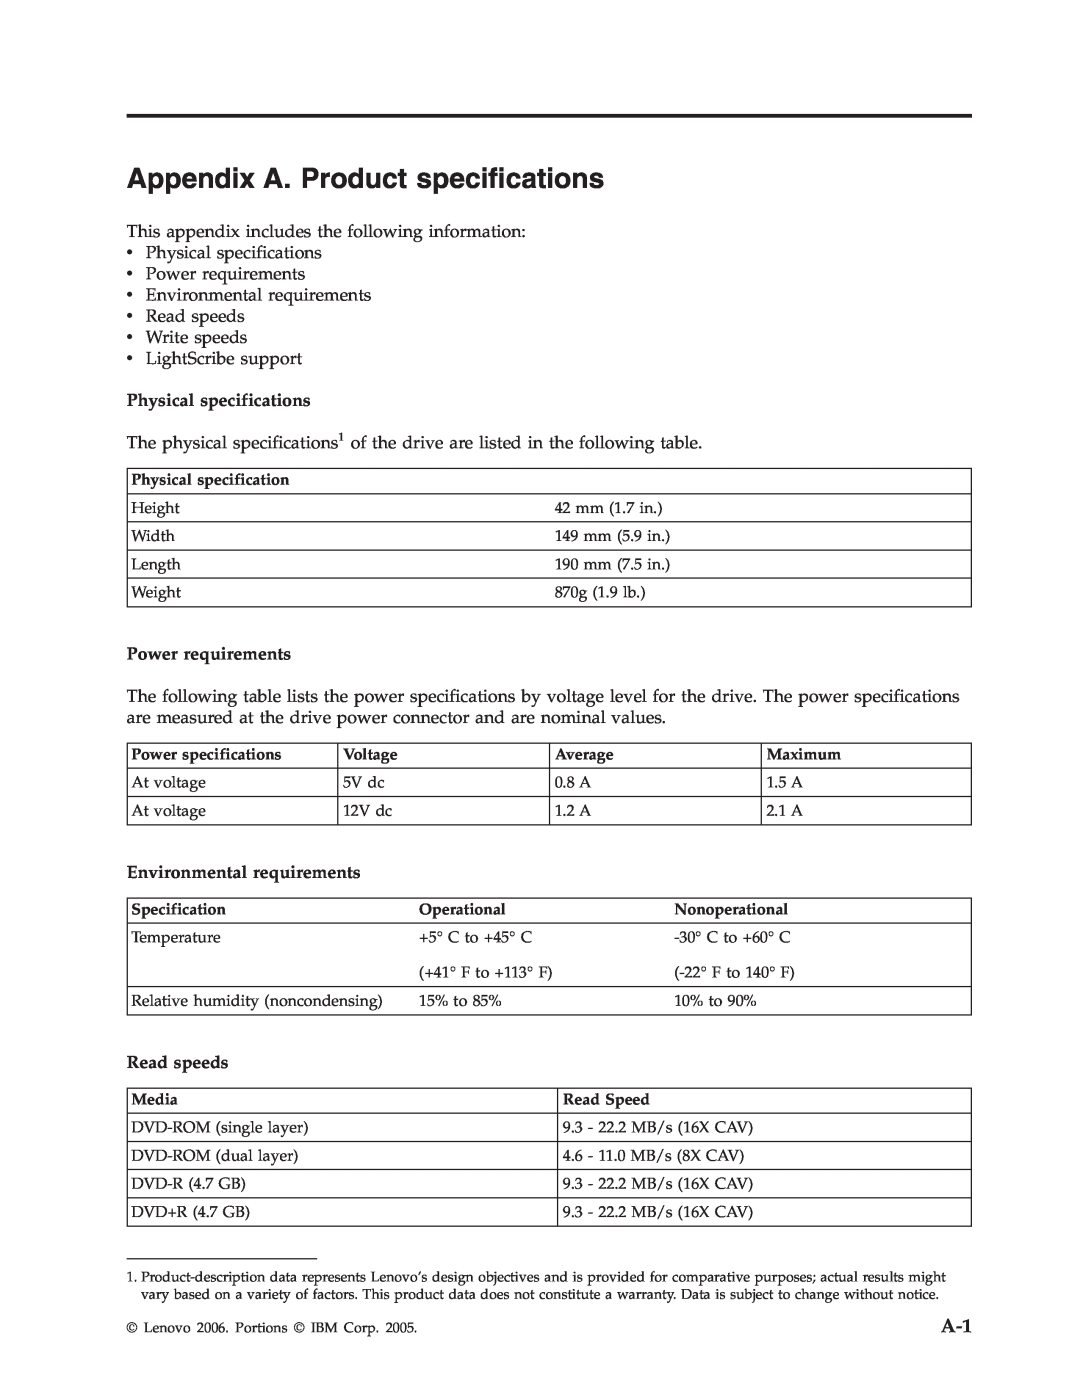 Lenovo 41N5583 Appendix A. Product specifications, Physical specifications, Power requirements, Environmental requirements 